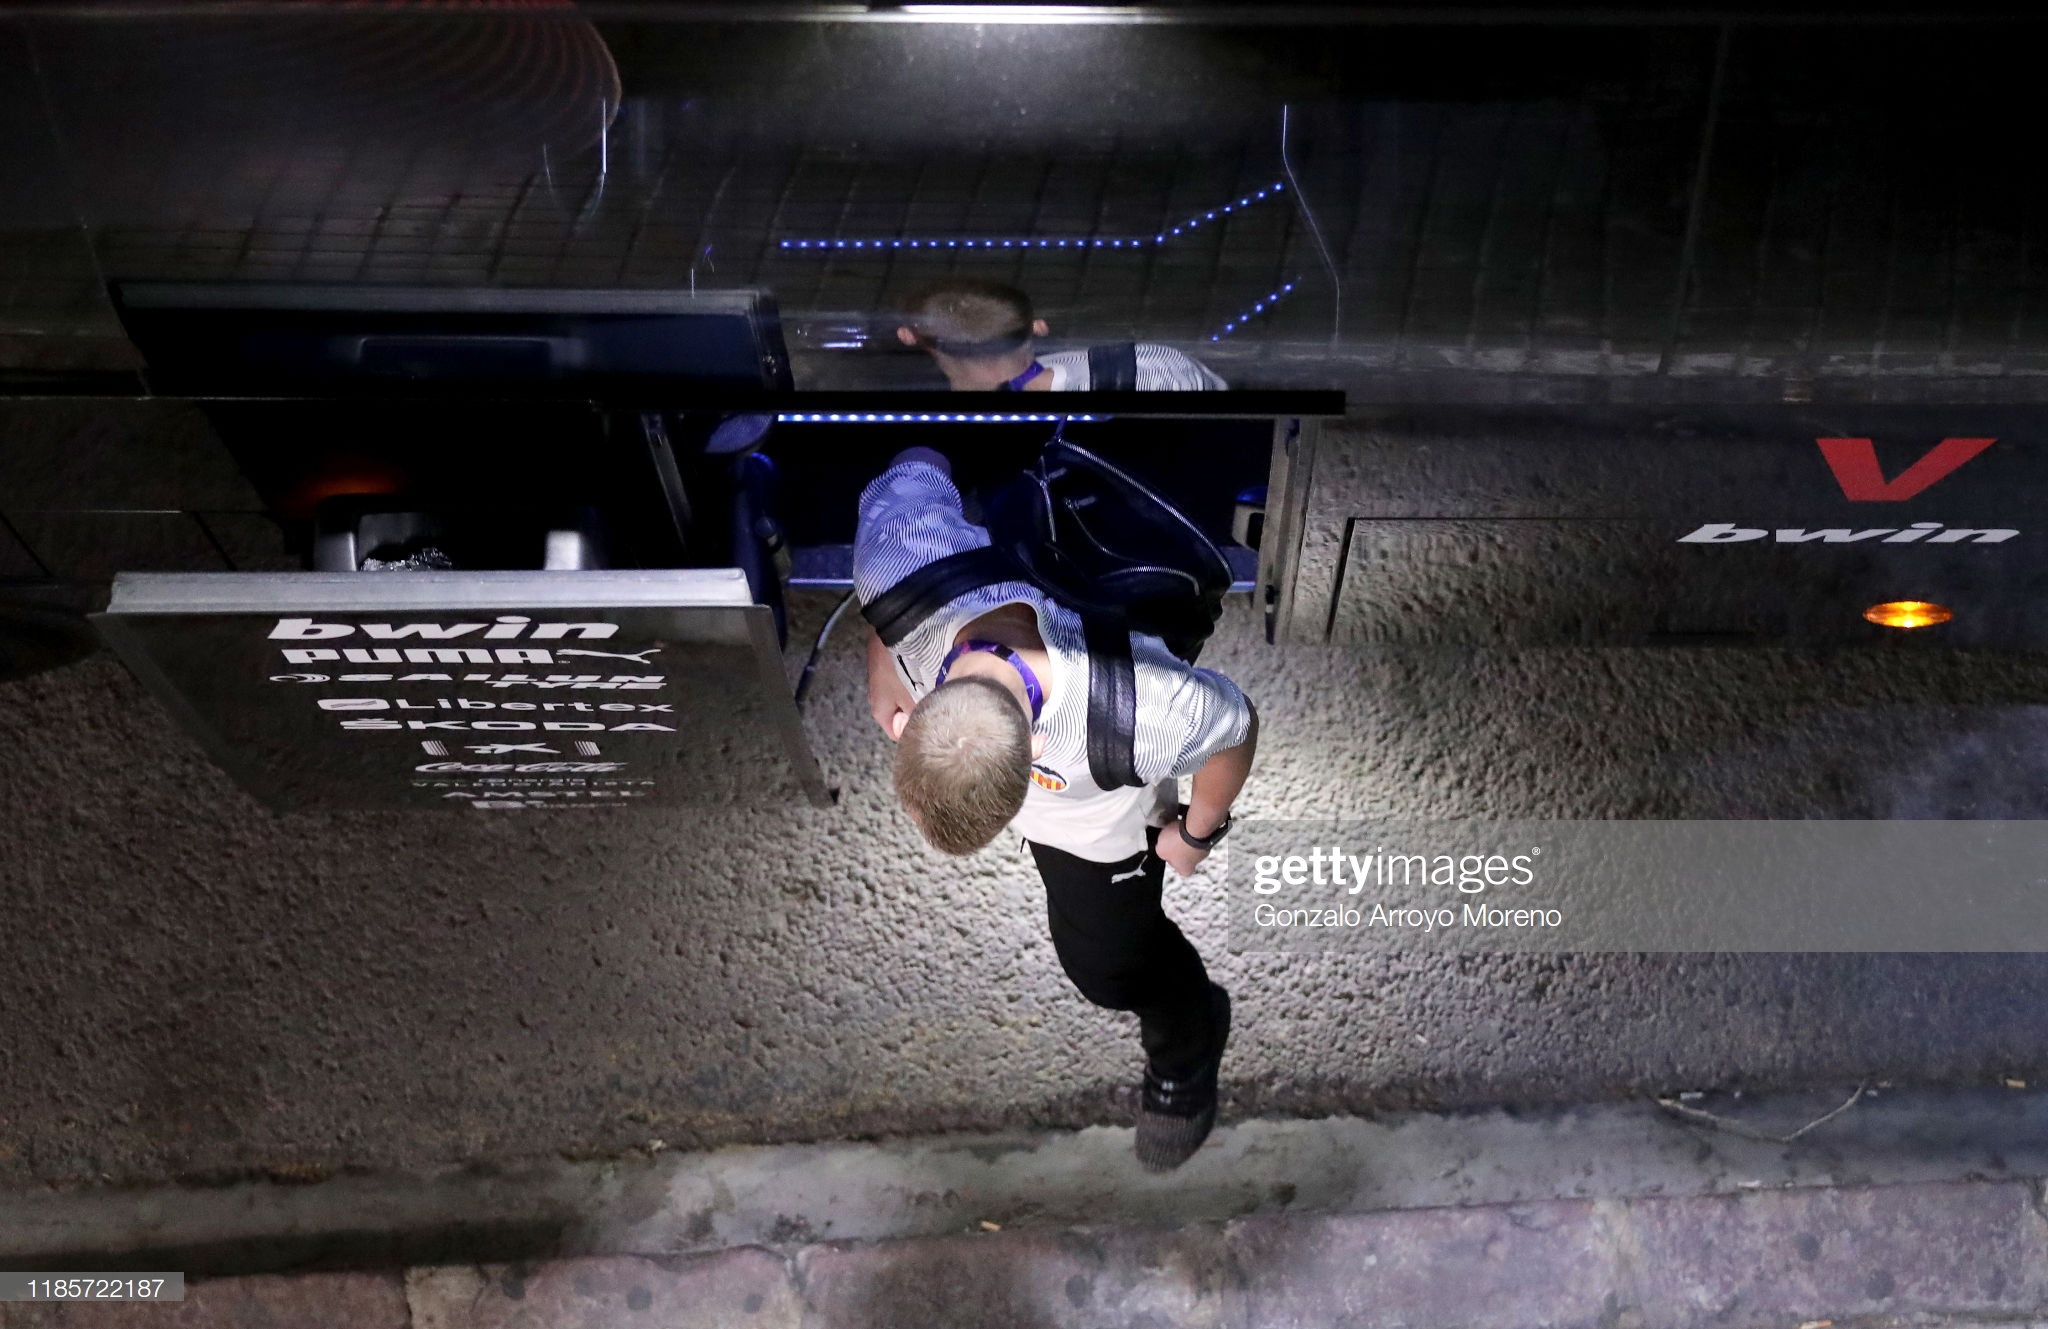 gettyimages-1185722187-2048x2048.jpg